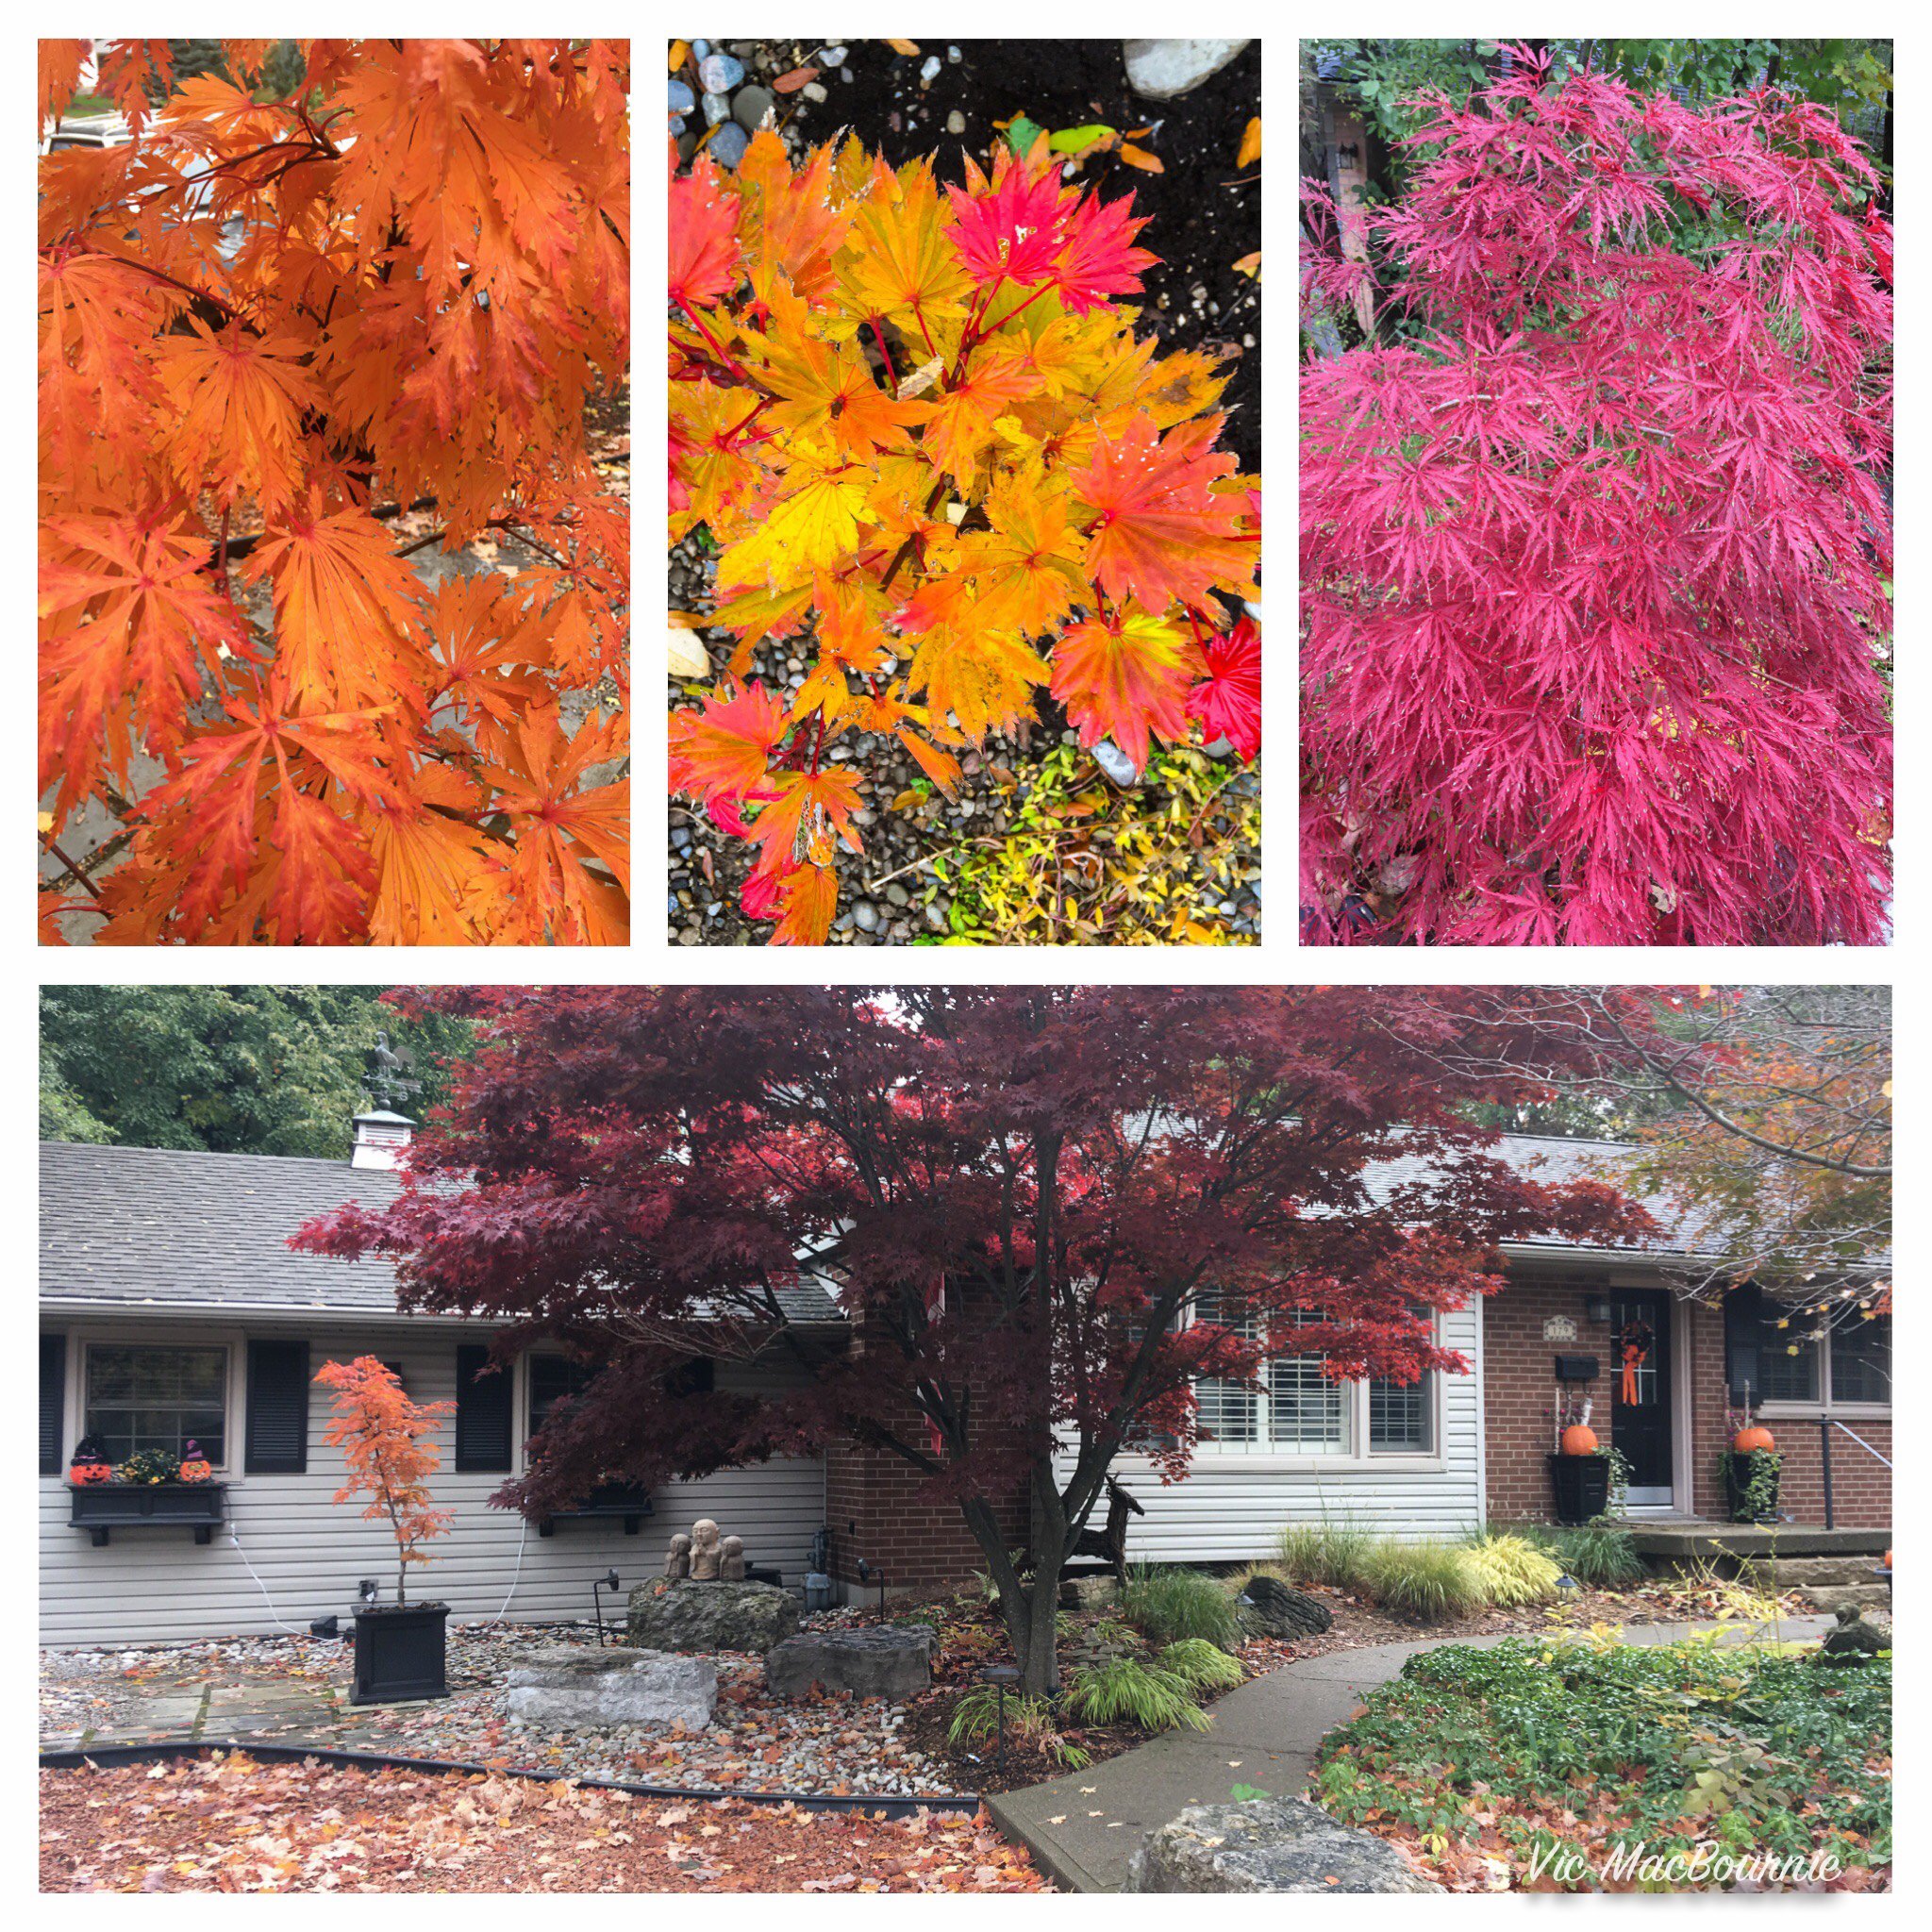 Focus on leaves of the Japanese Maple